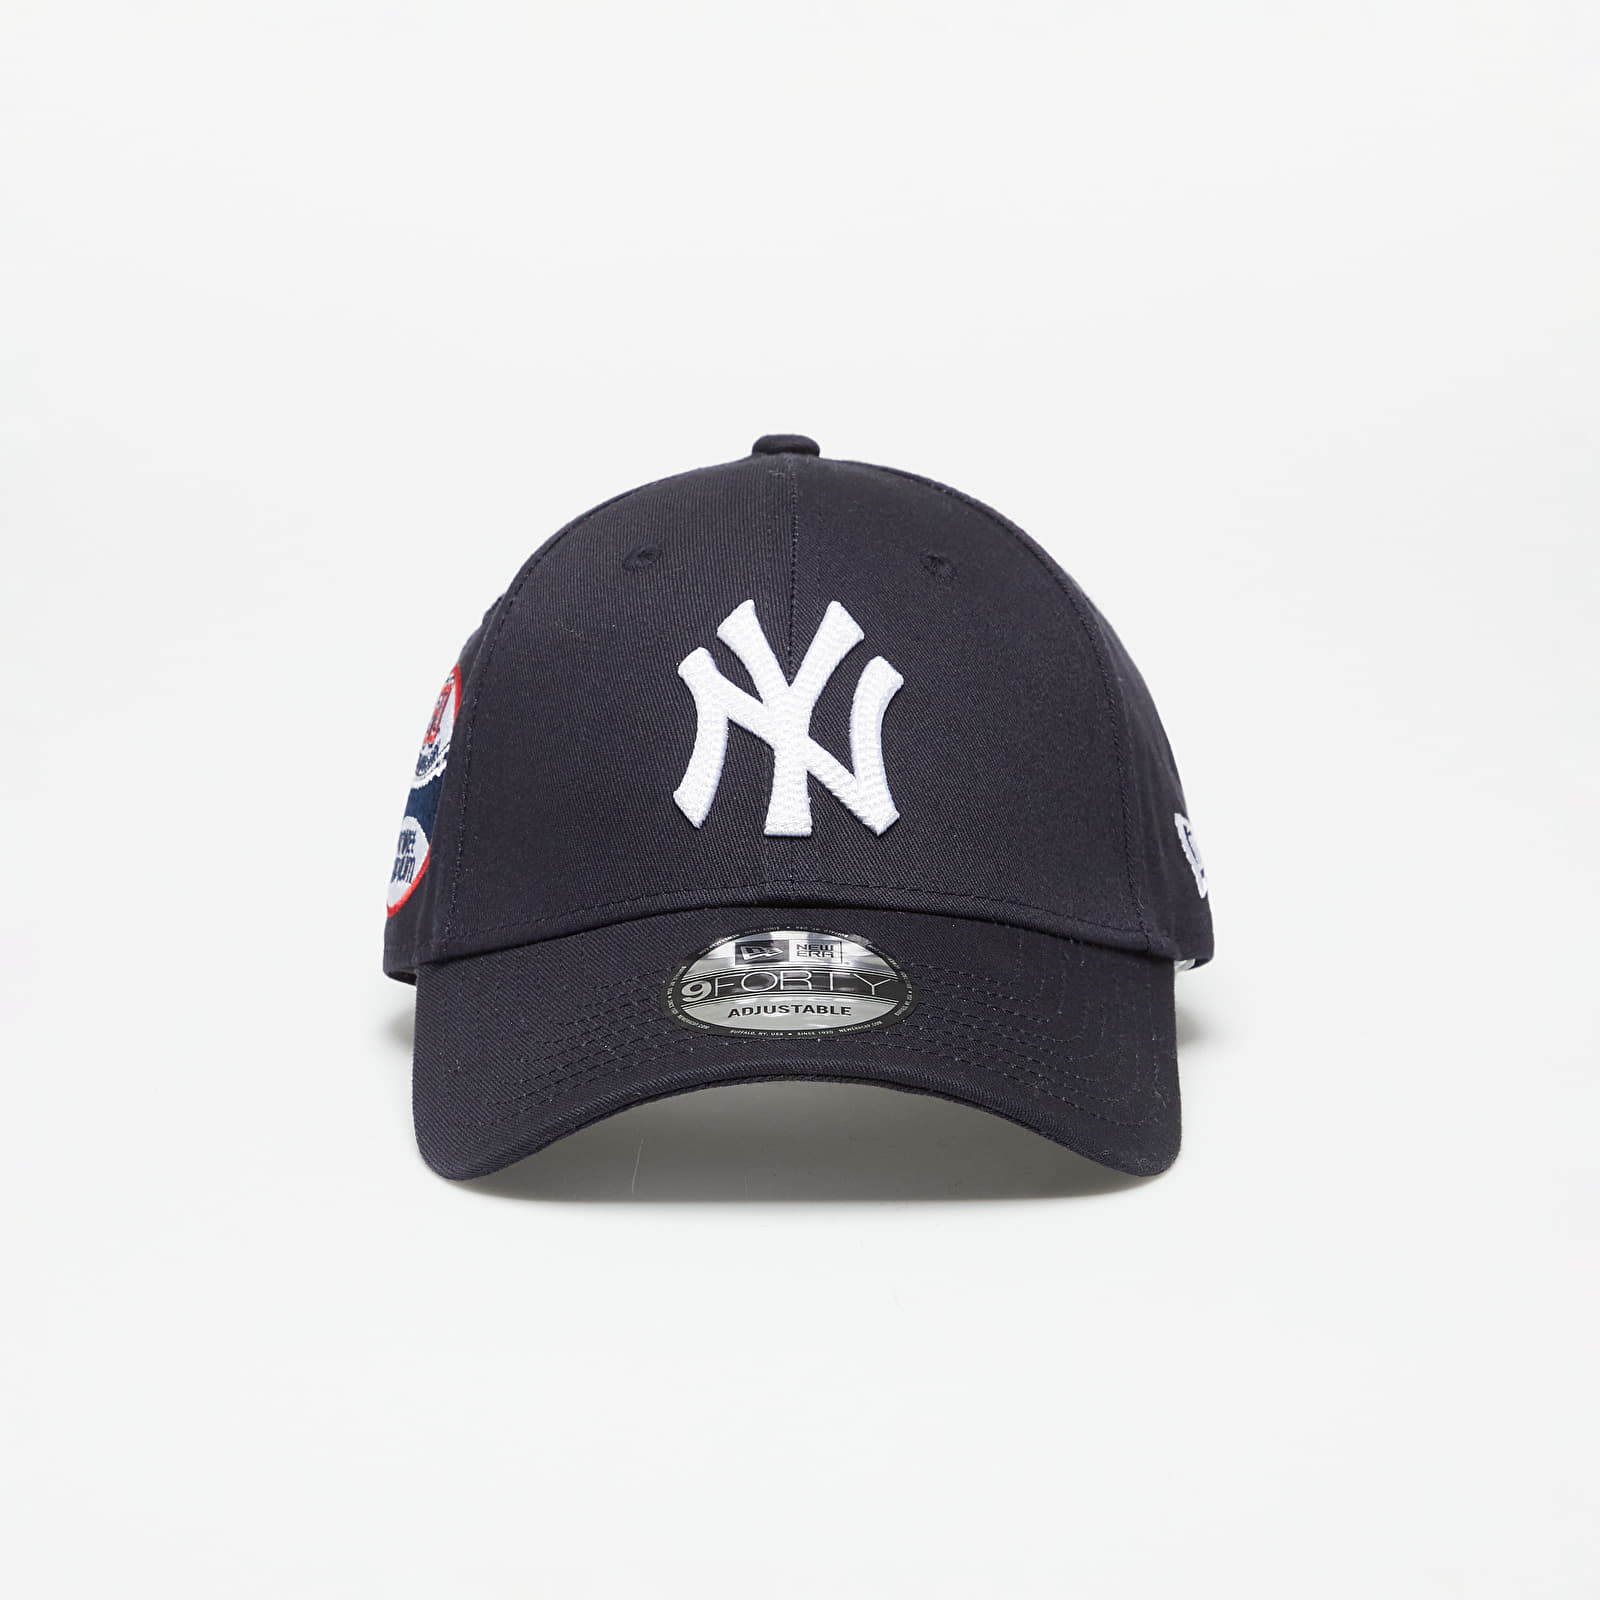 New Era New York Yankees New Traditions 9FORTY Adjustable Cap Navy/ White